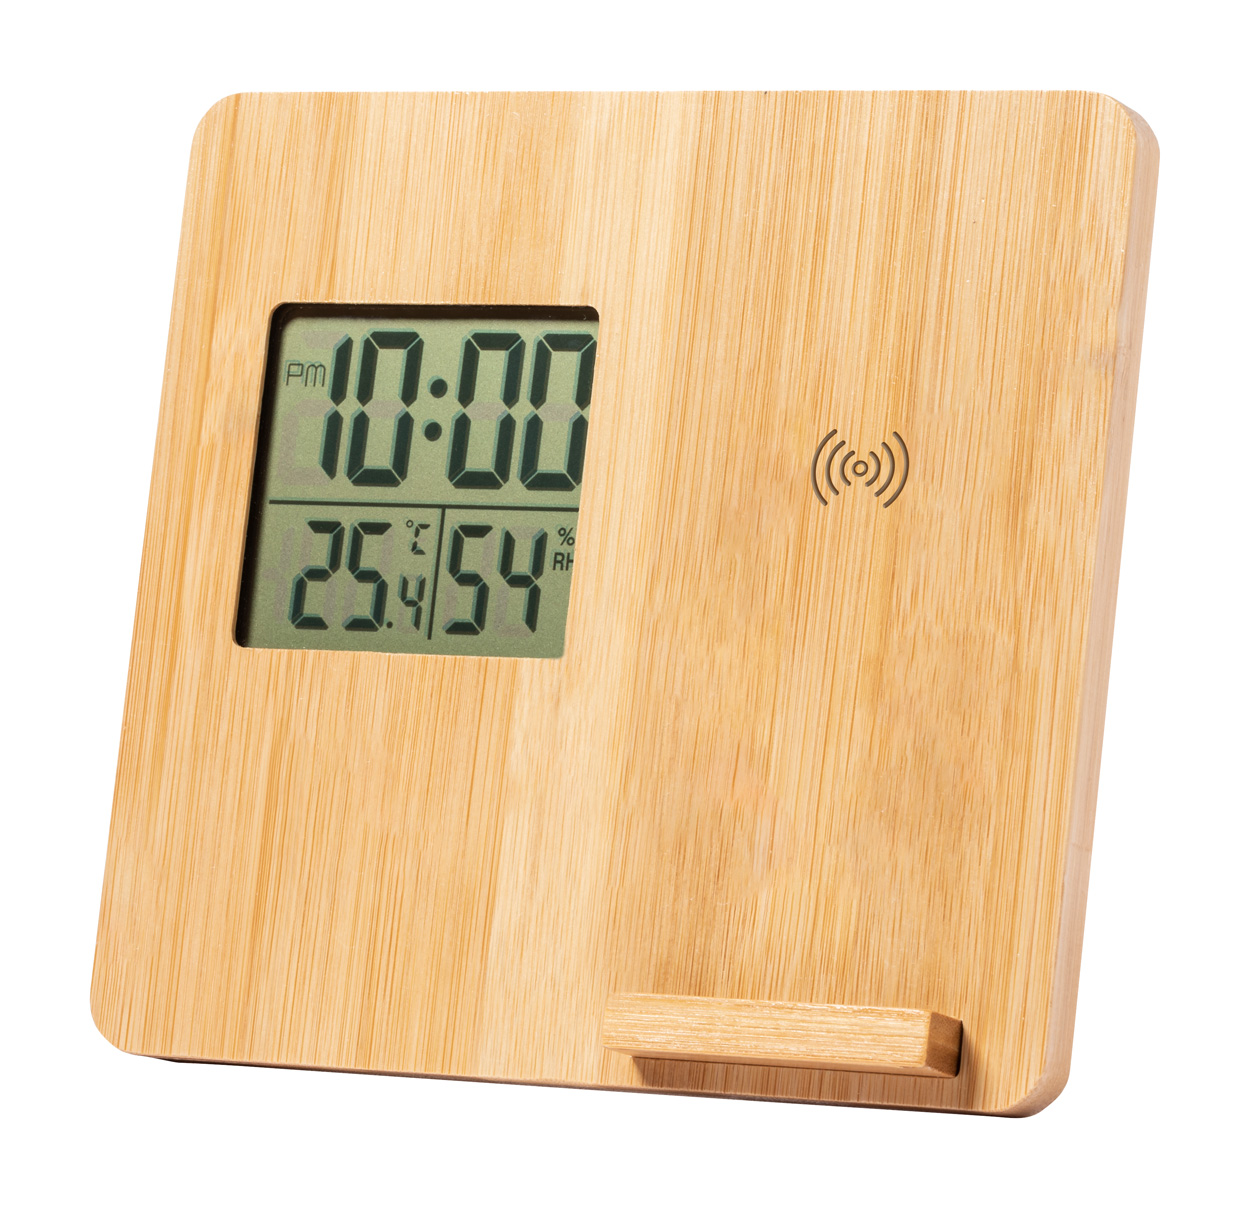 Fiory rechargeable weather station - beige